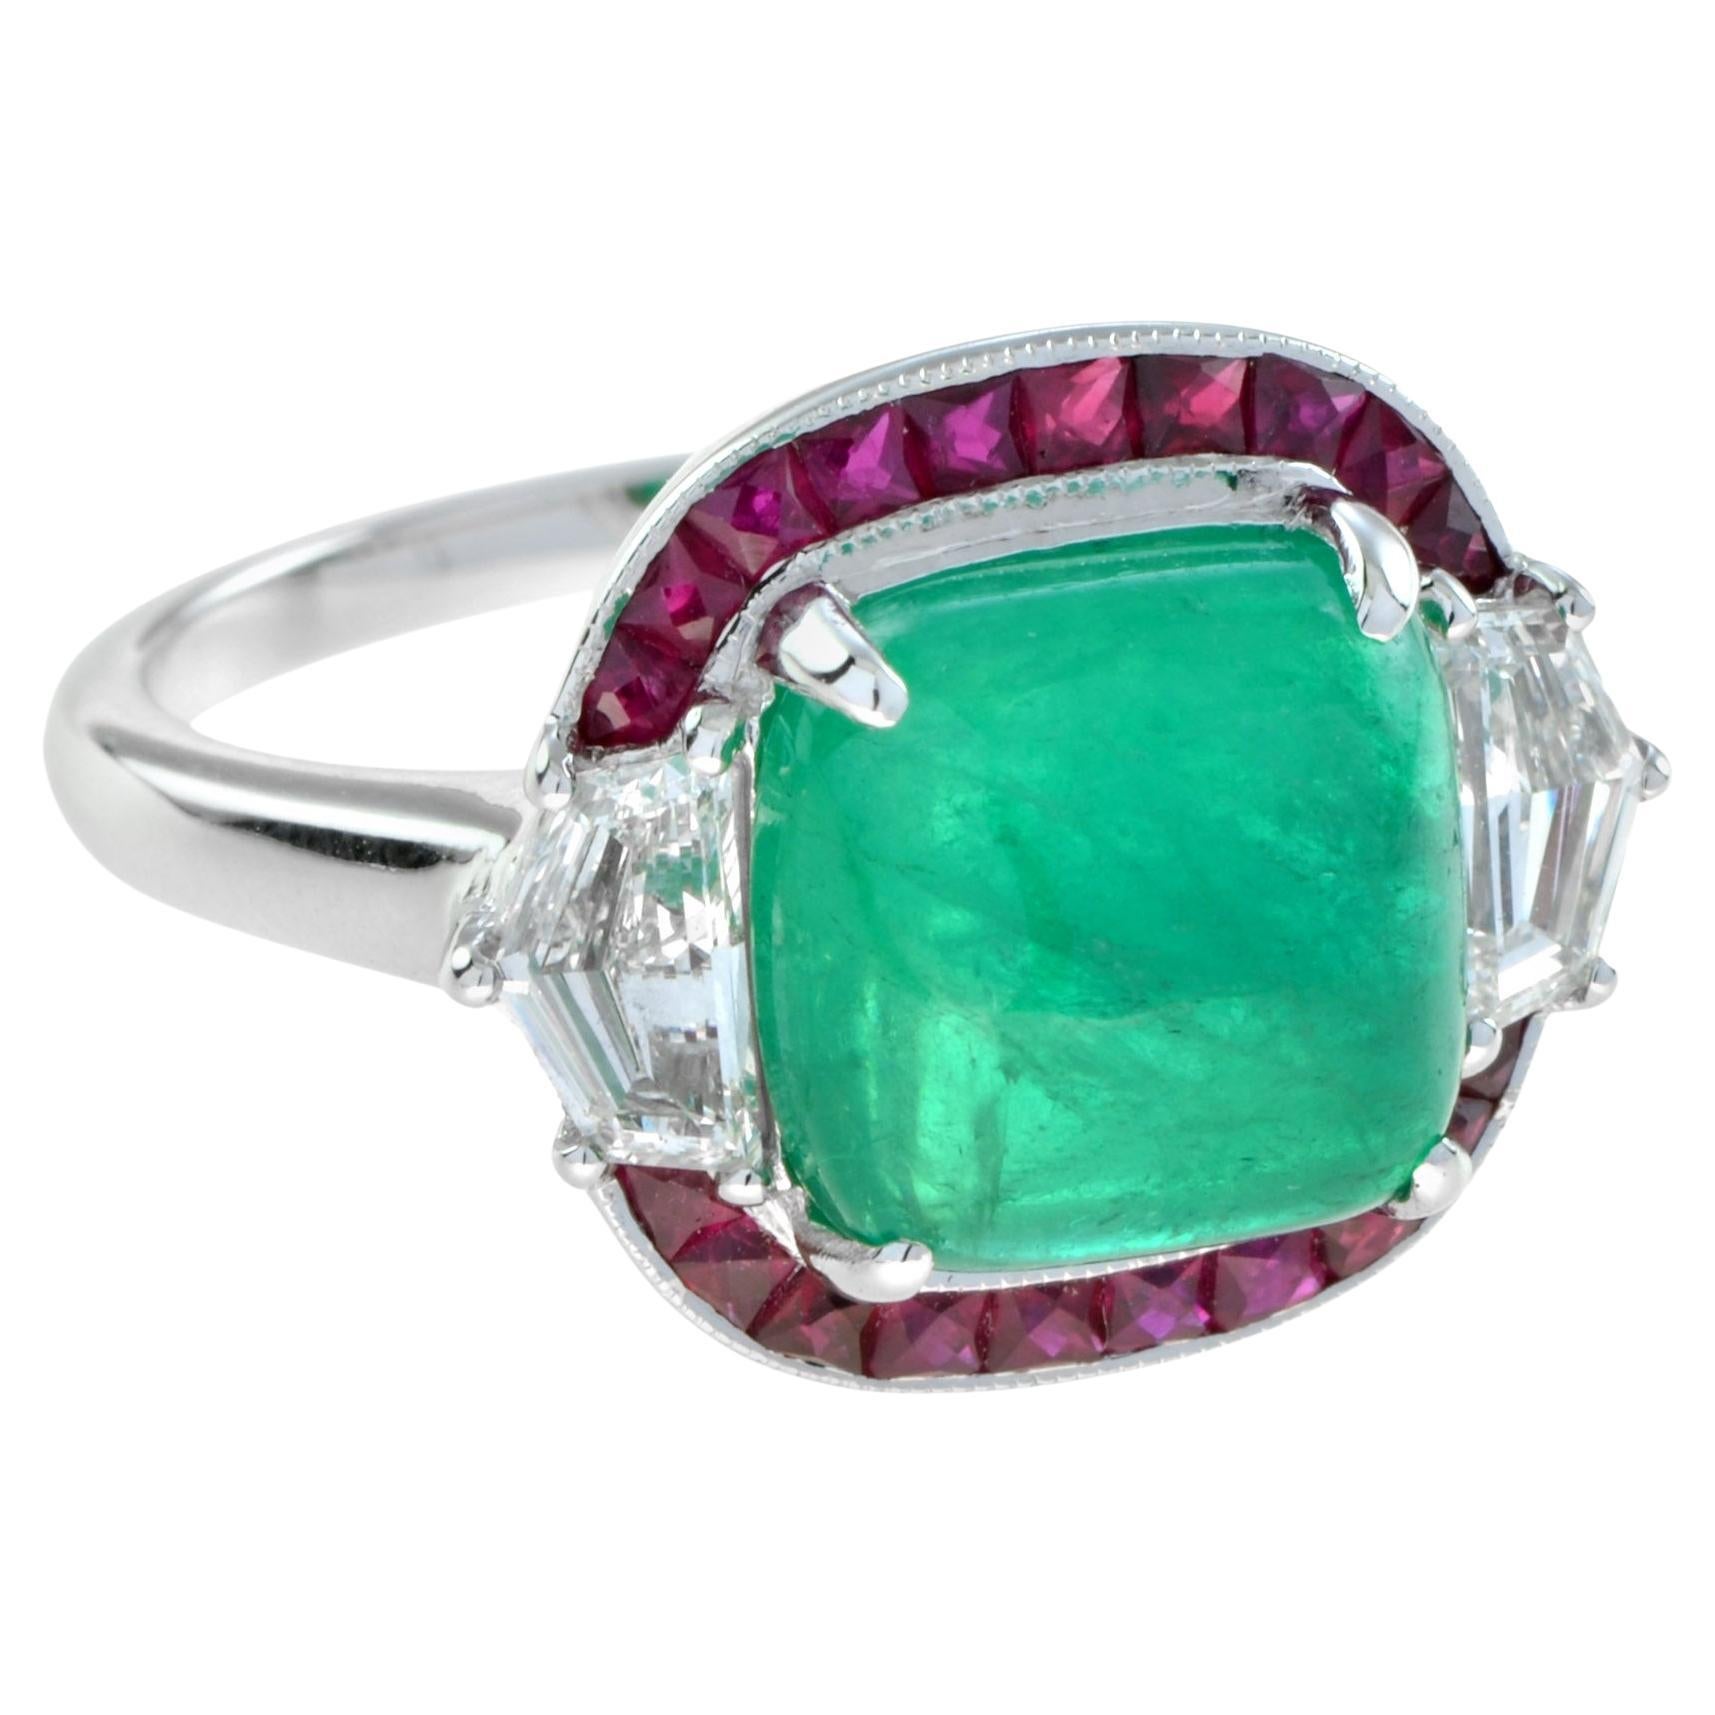 4.12 Carat Cabochon Emerald with Ruby and Diamond Halo Ring in 18K White Gold